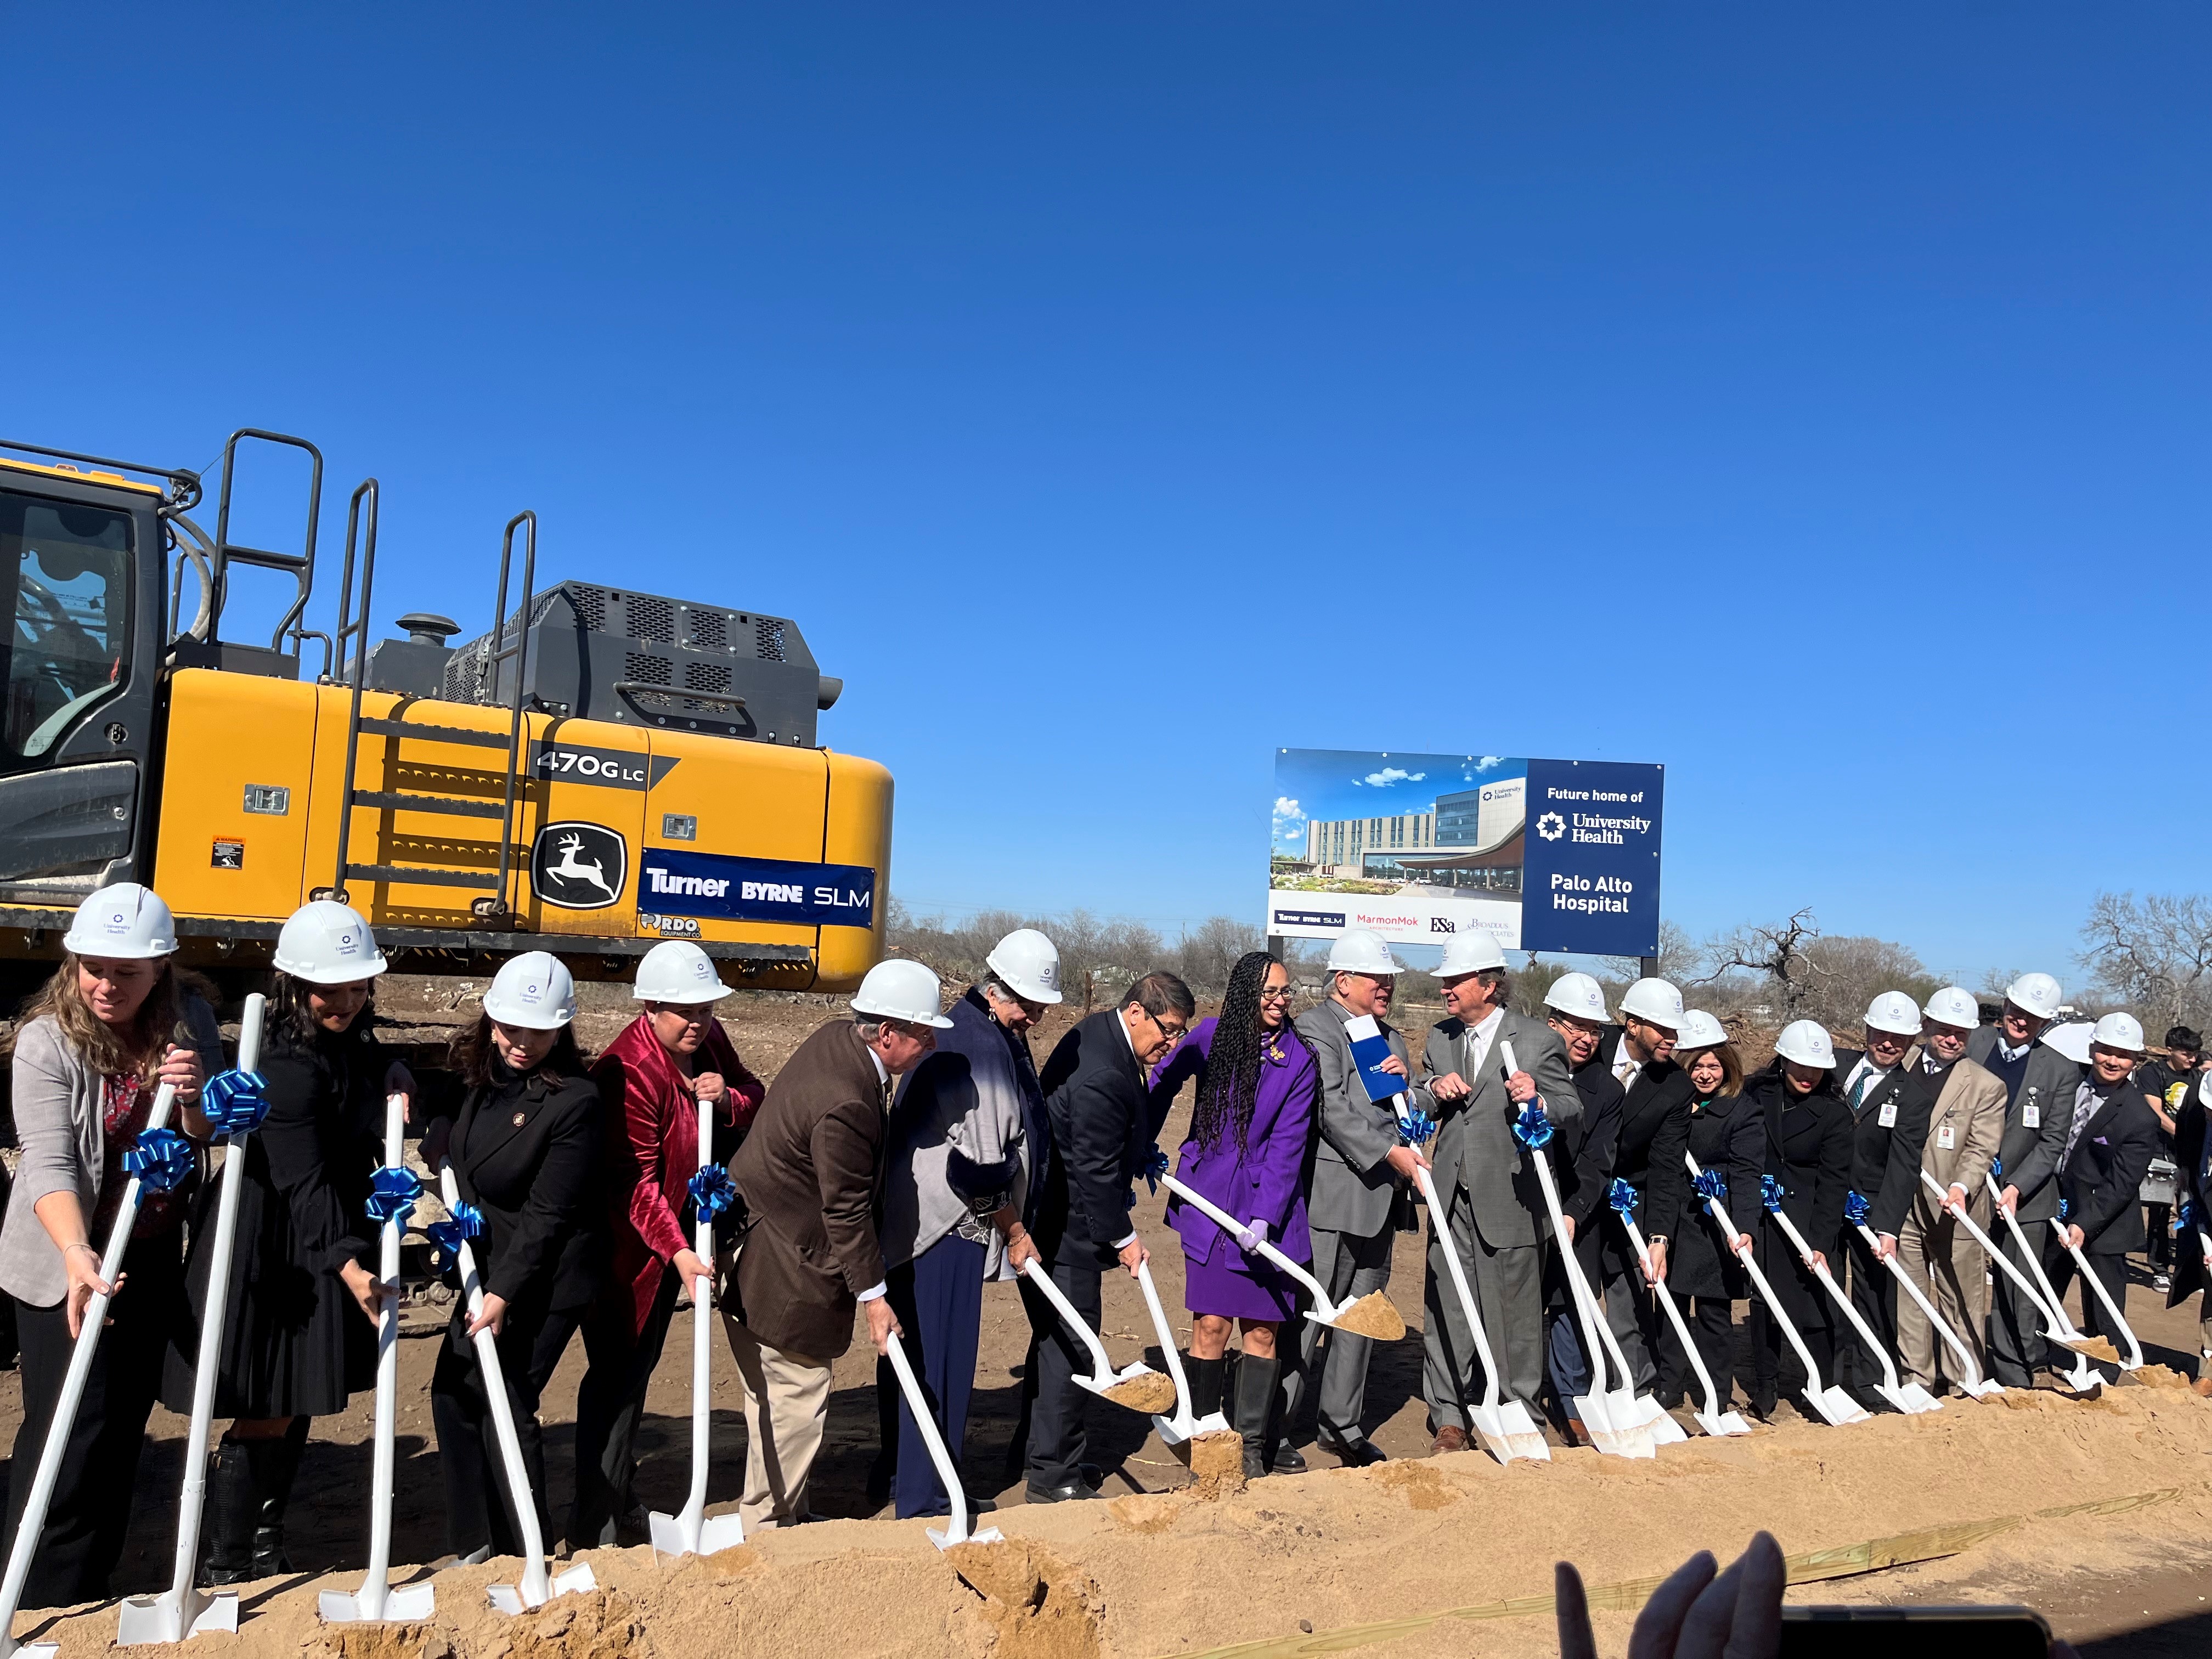 Health care, community and academic leaders turning the first shovels of dirt